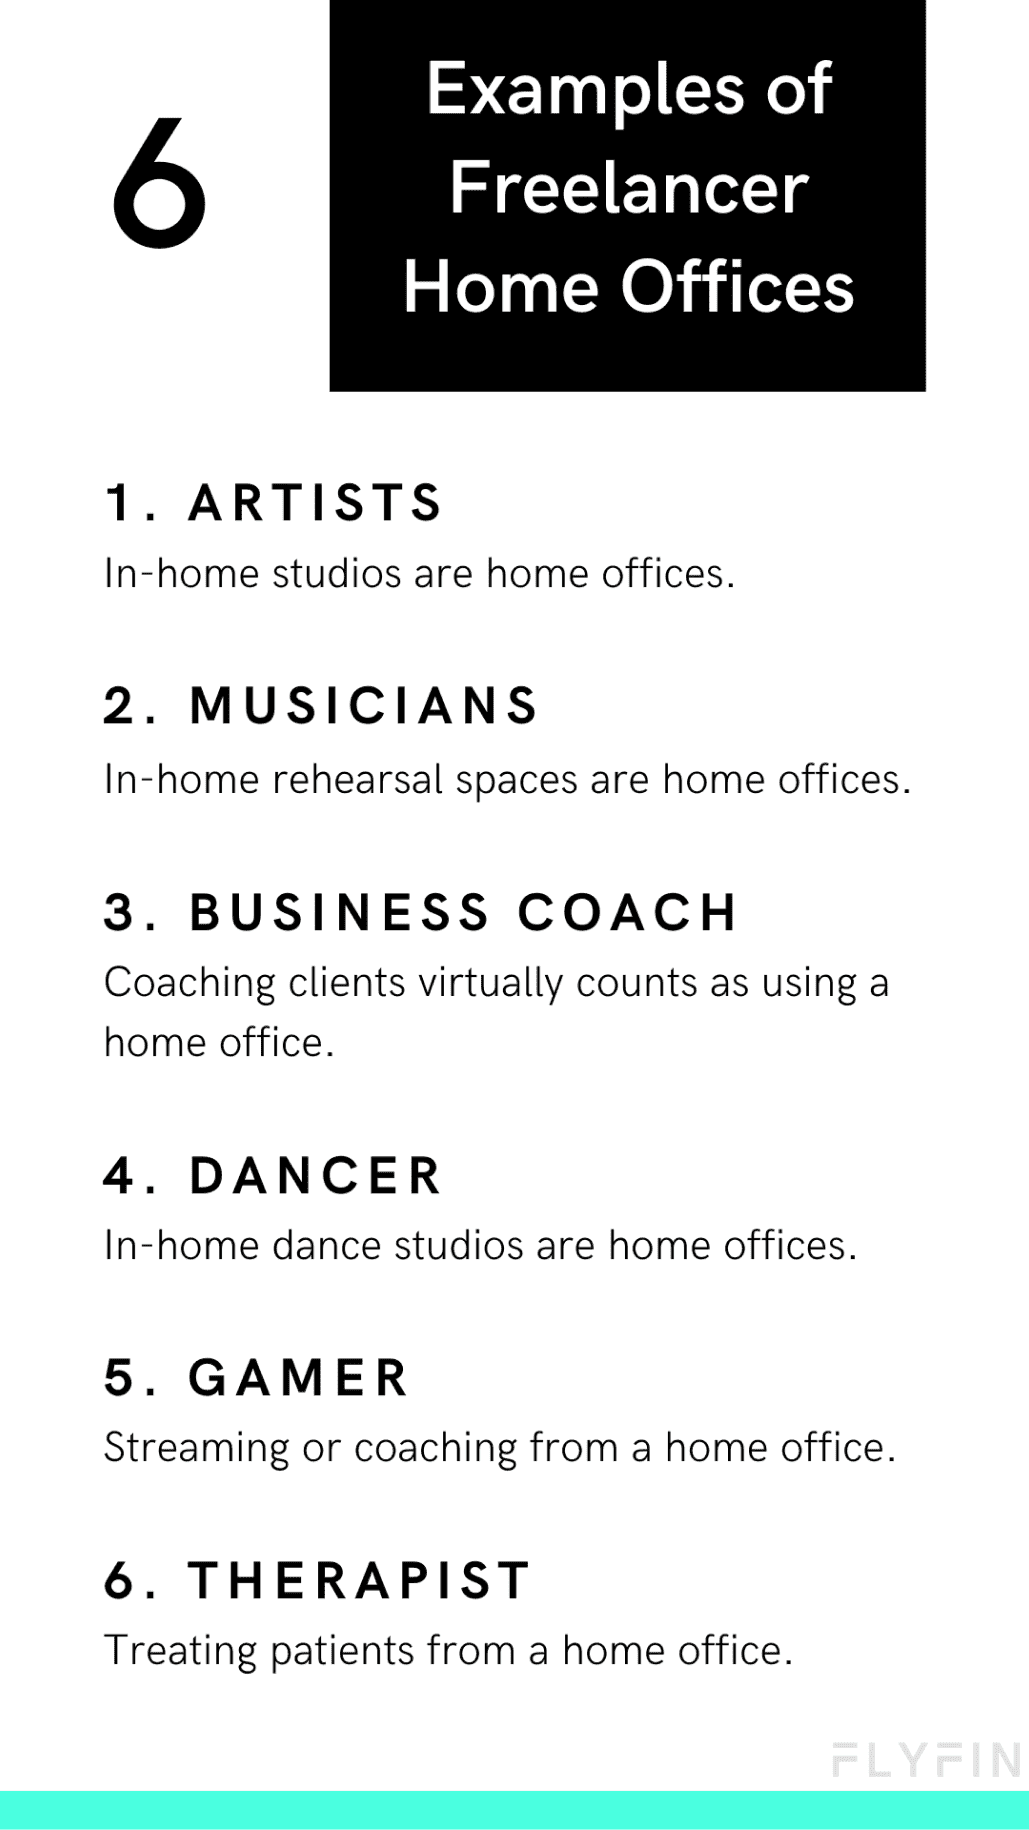 Image showcasing examples of self-employed individuals and freelancers who use their home offices, including artists, musicians, business coaches, dancers, gamers, and therapists. No mention of 1099 or taxes.